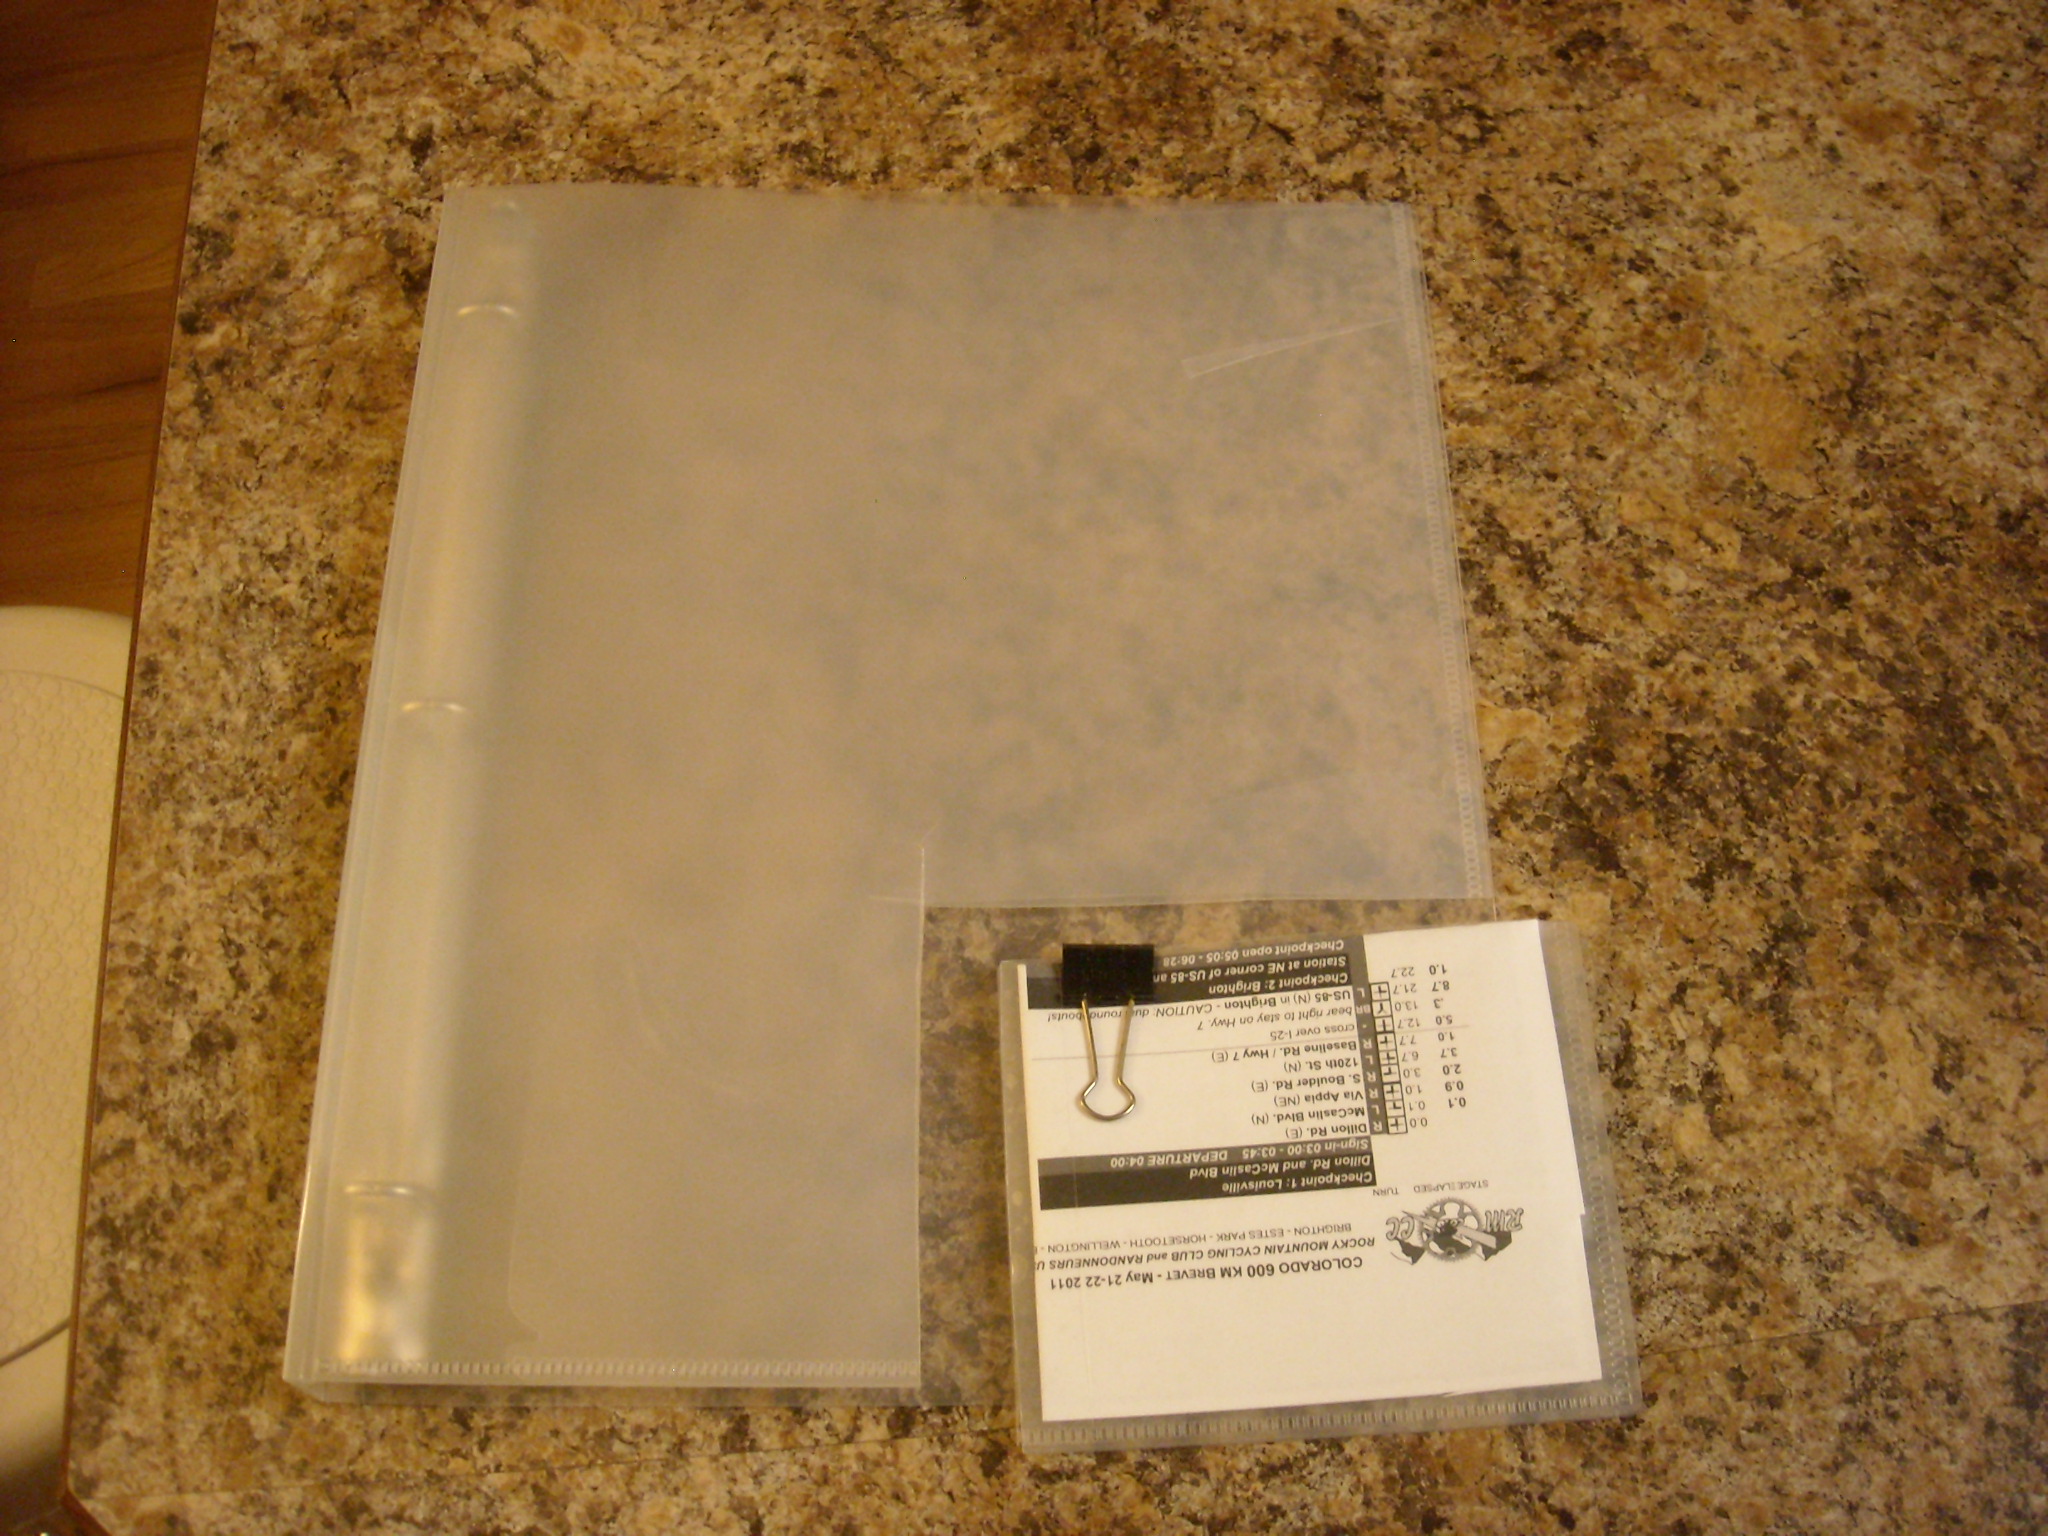 Cutting down the binder to a more appropriate size (5 inches X 4 inches).  Two pieces of plastic are then joined together by clear tape to create a "pocket."